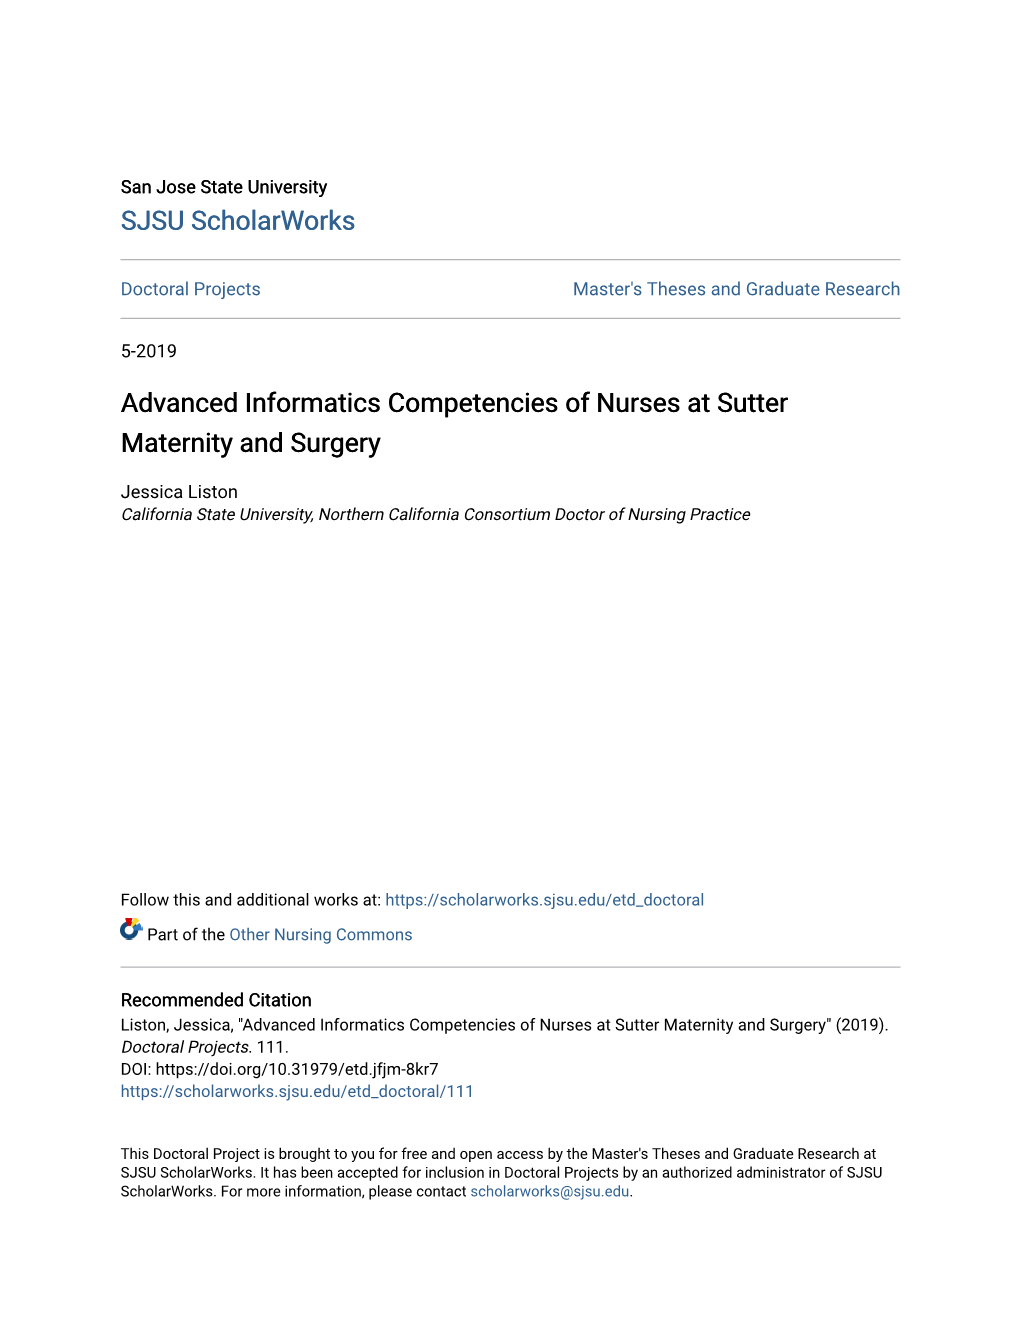 Advanced Informatics Competencies of Nurses at Sutter Maternity and Surgery